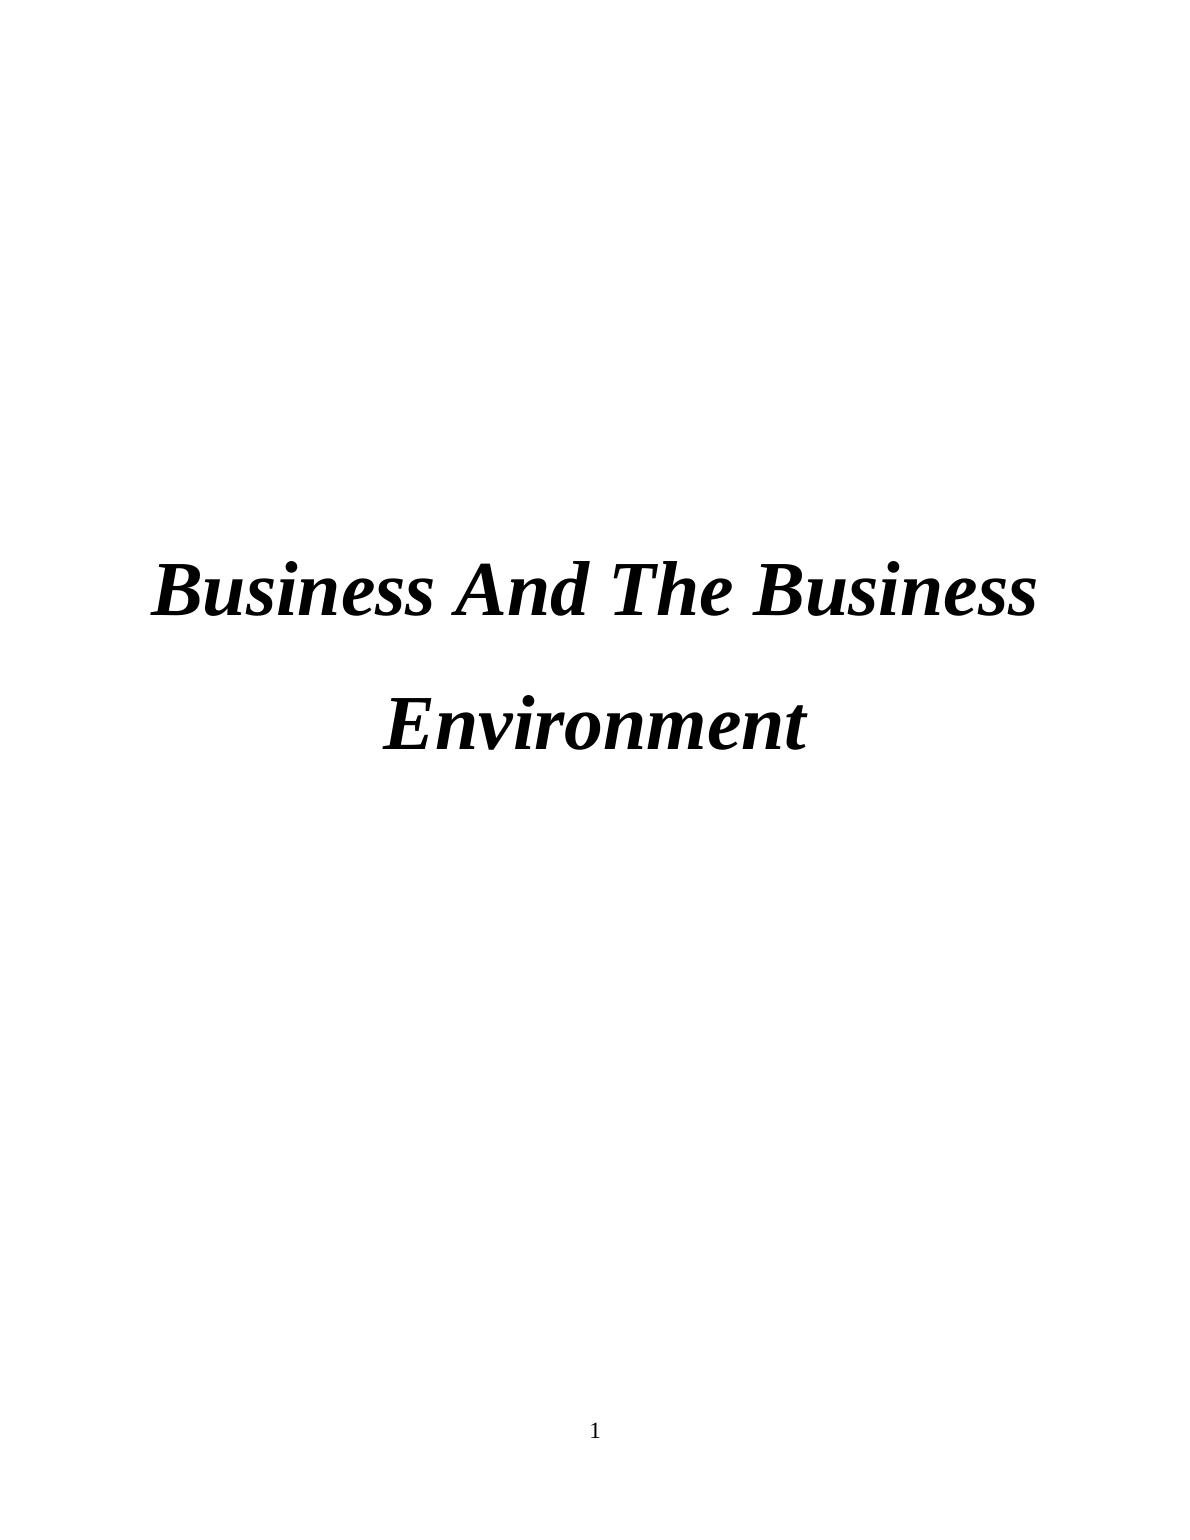 Business And The Business Environment TABLE OF CONTENT INTRODUCTION_1